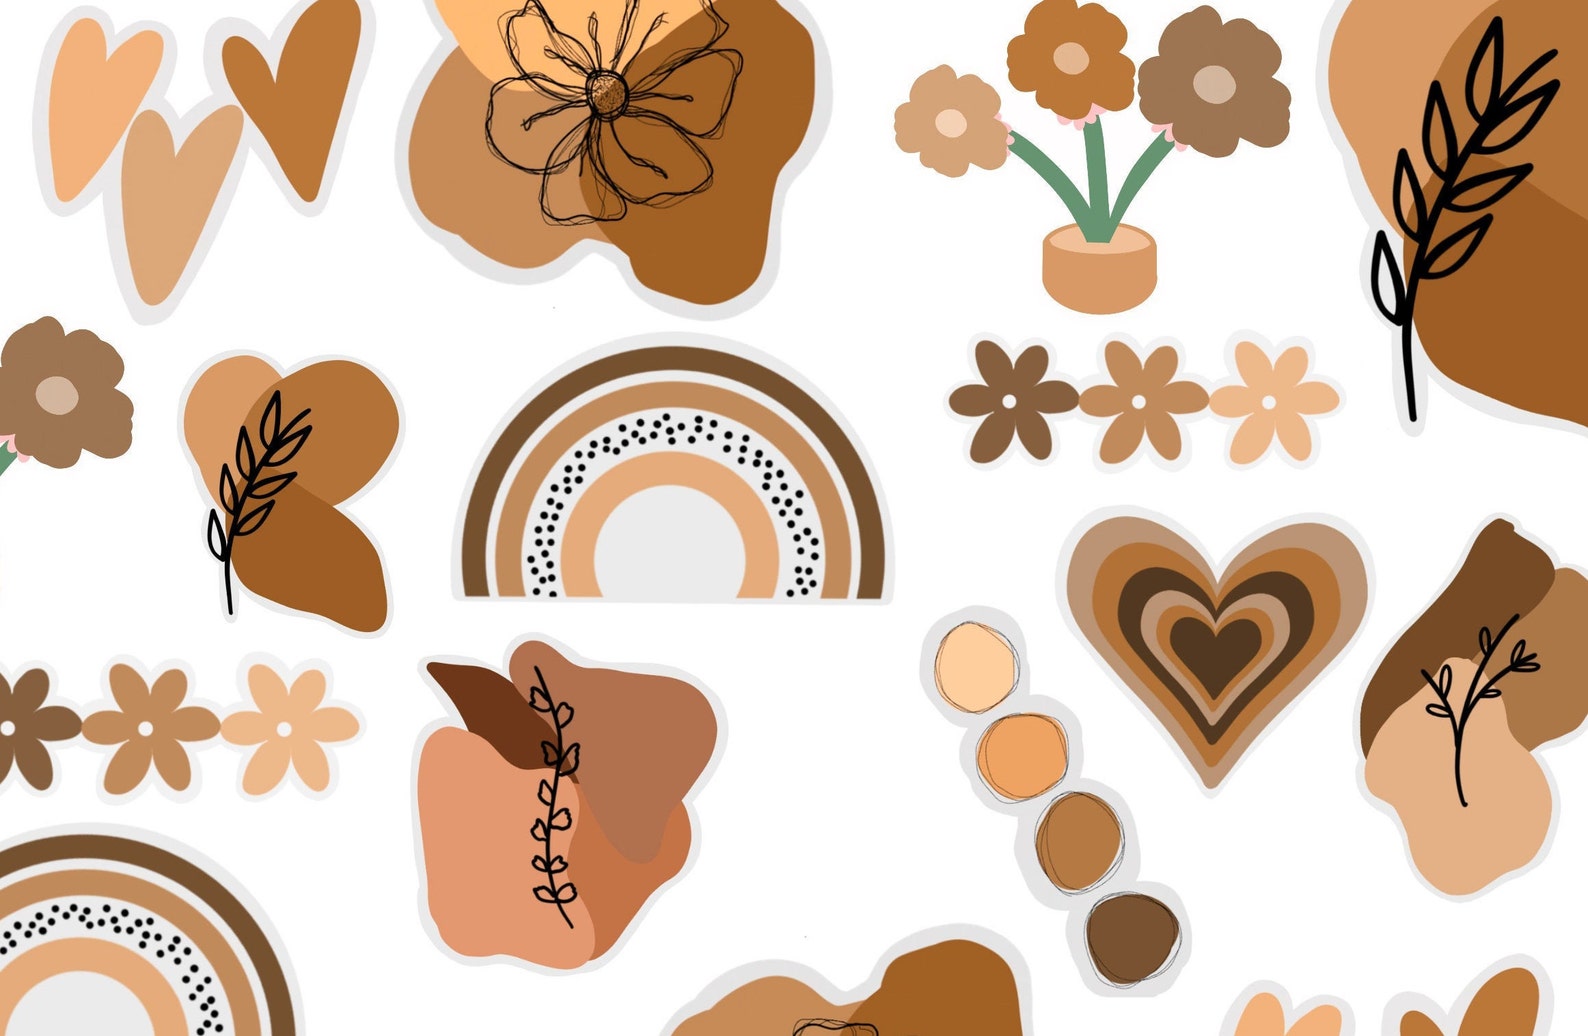 Pack Of Stickers 10pcs Brown Stickers Laptop Sticker Etsy 